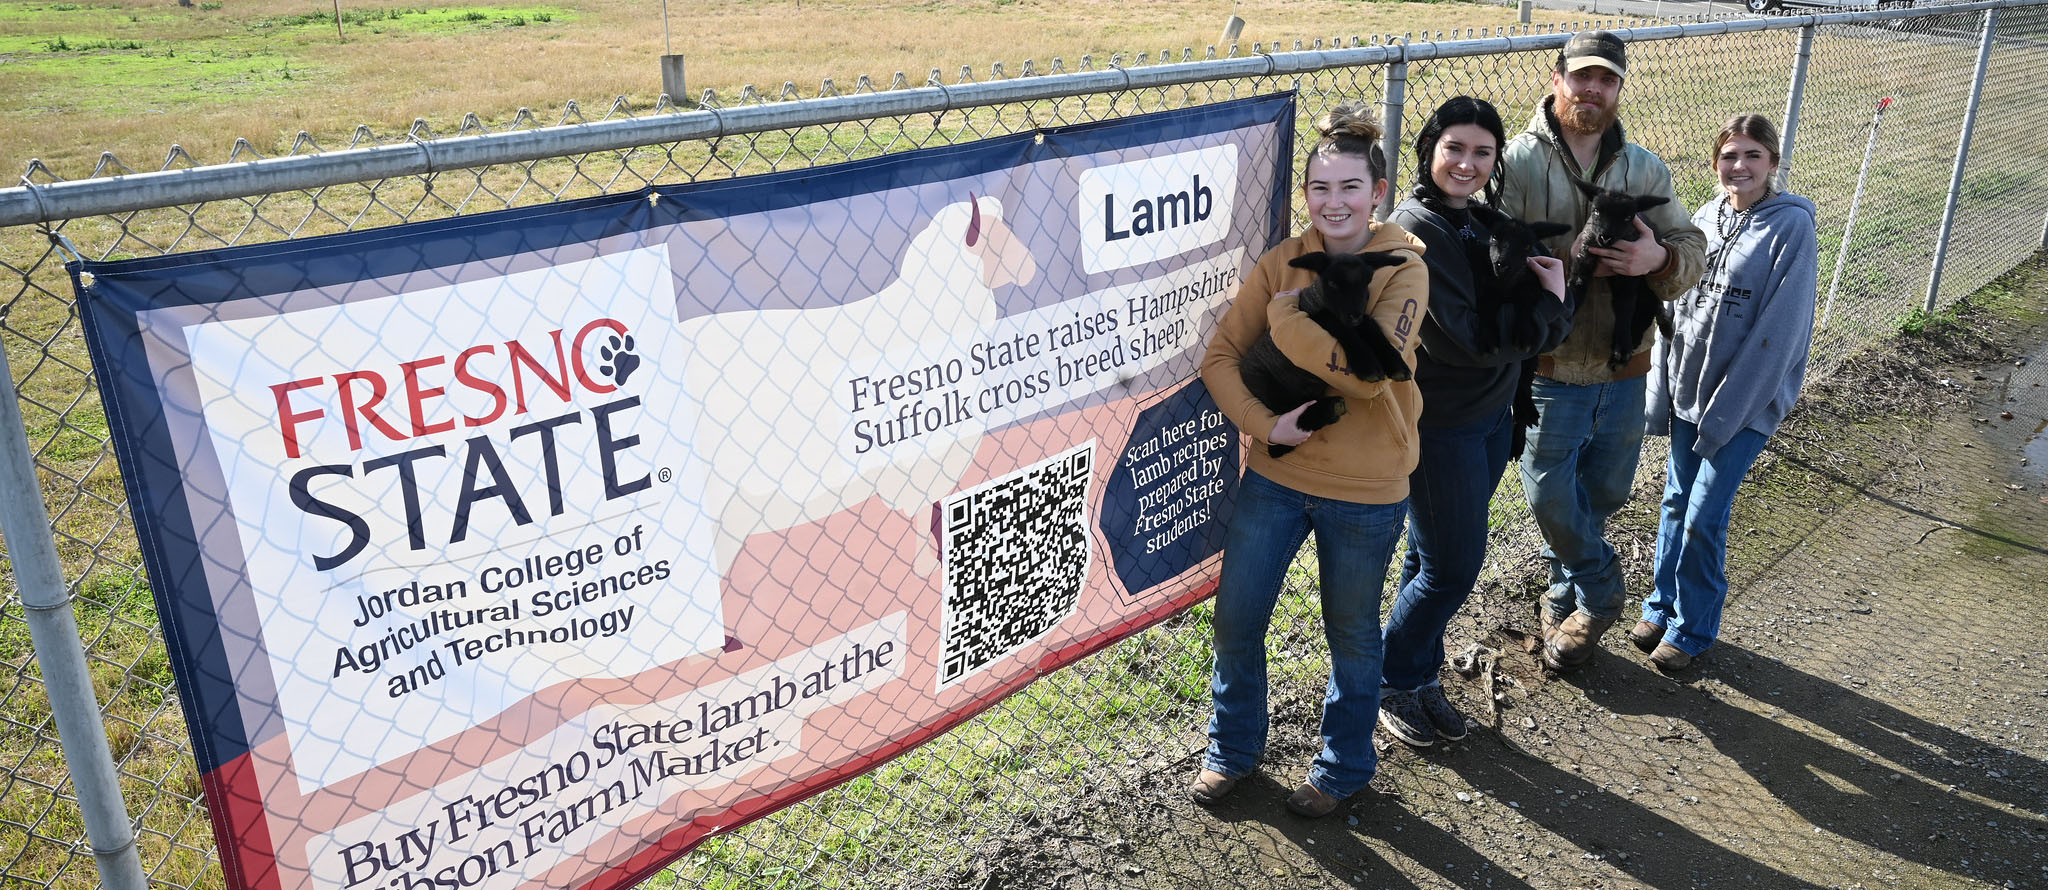 Students in front of Lamb sign